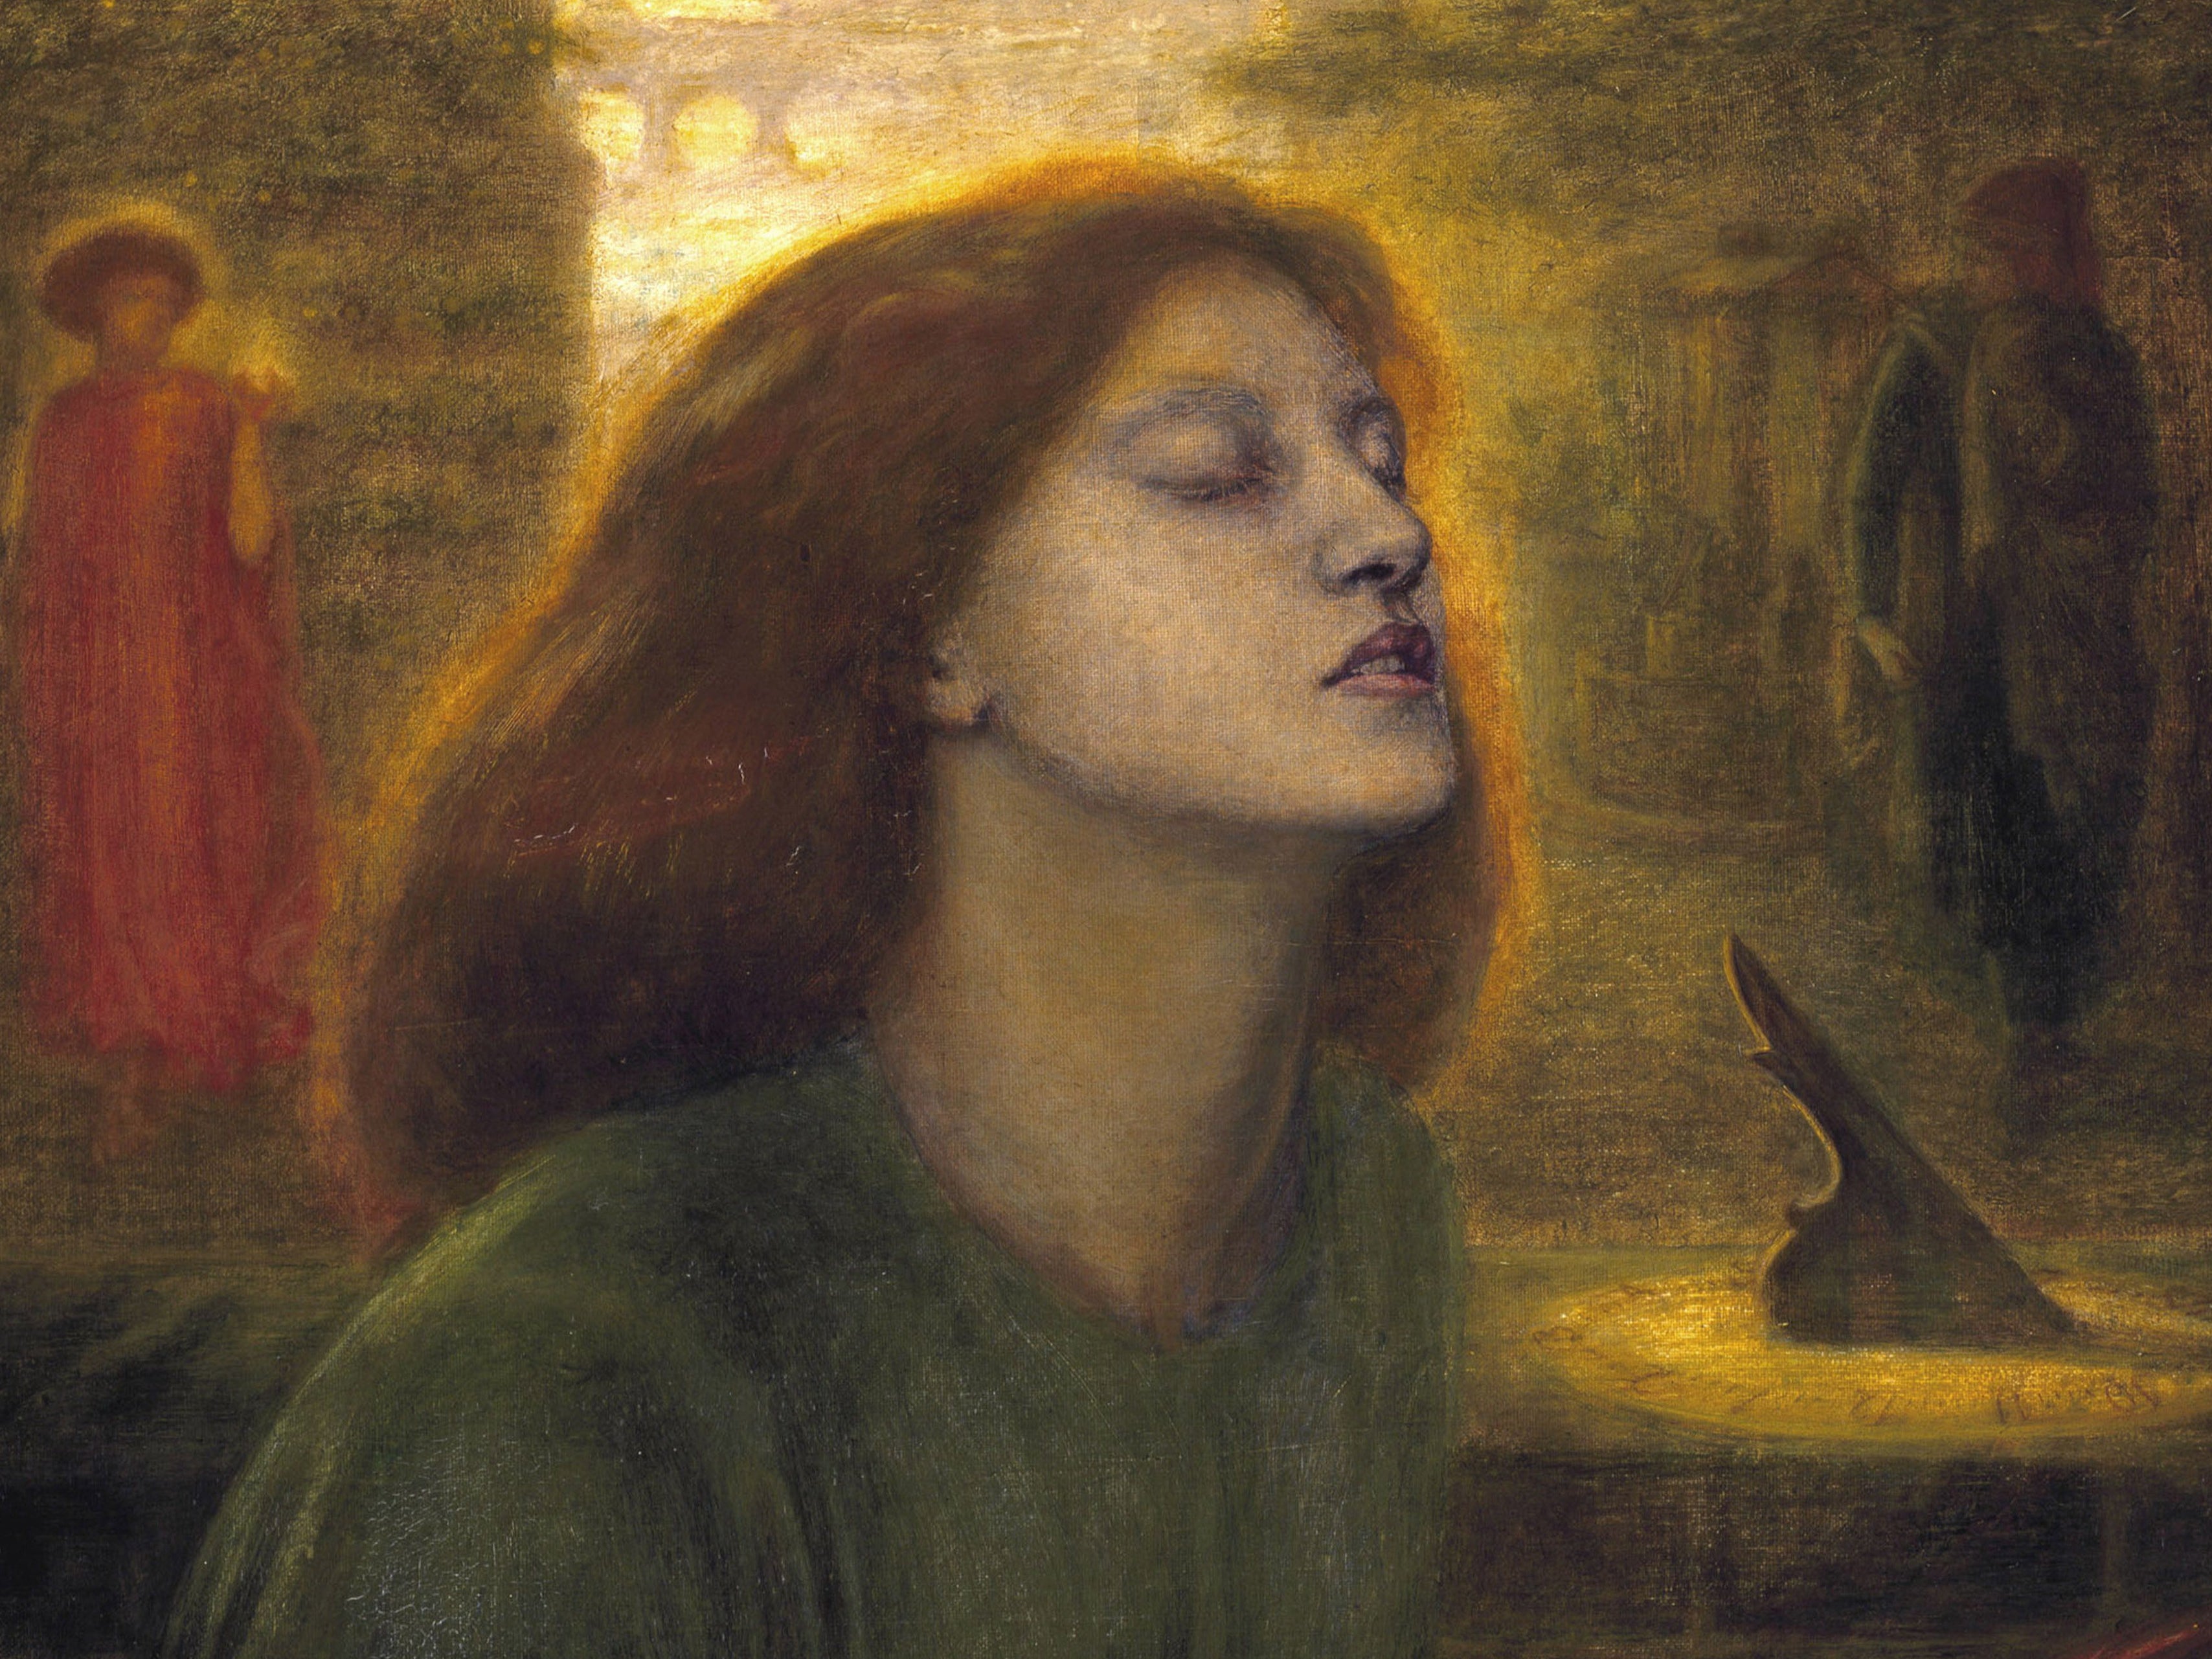 Rossetti’s ‘Beata Beatrix’ depicts the moment his wife Elizabeth Siddal died beside the Thames